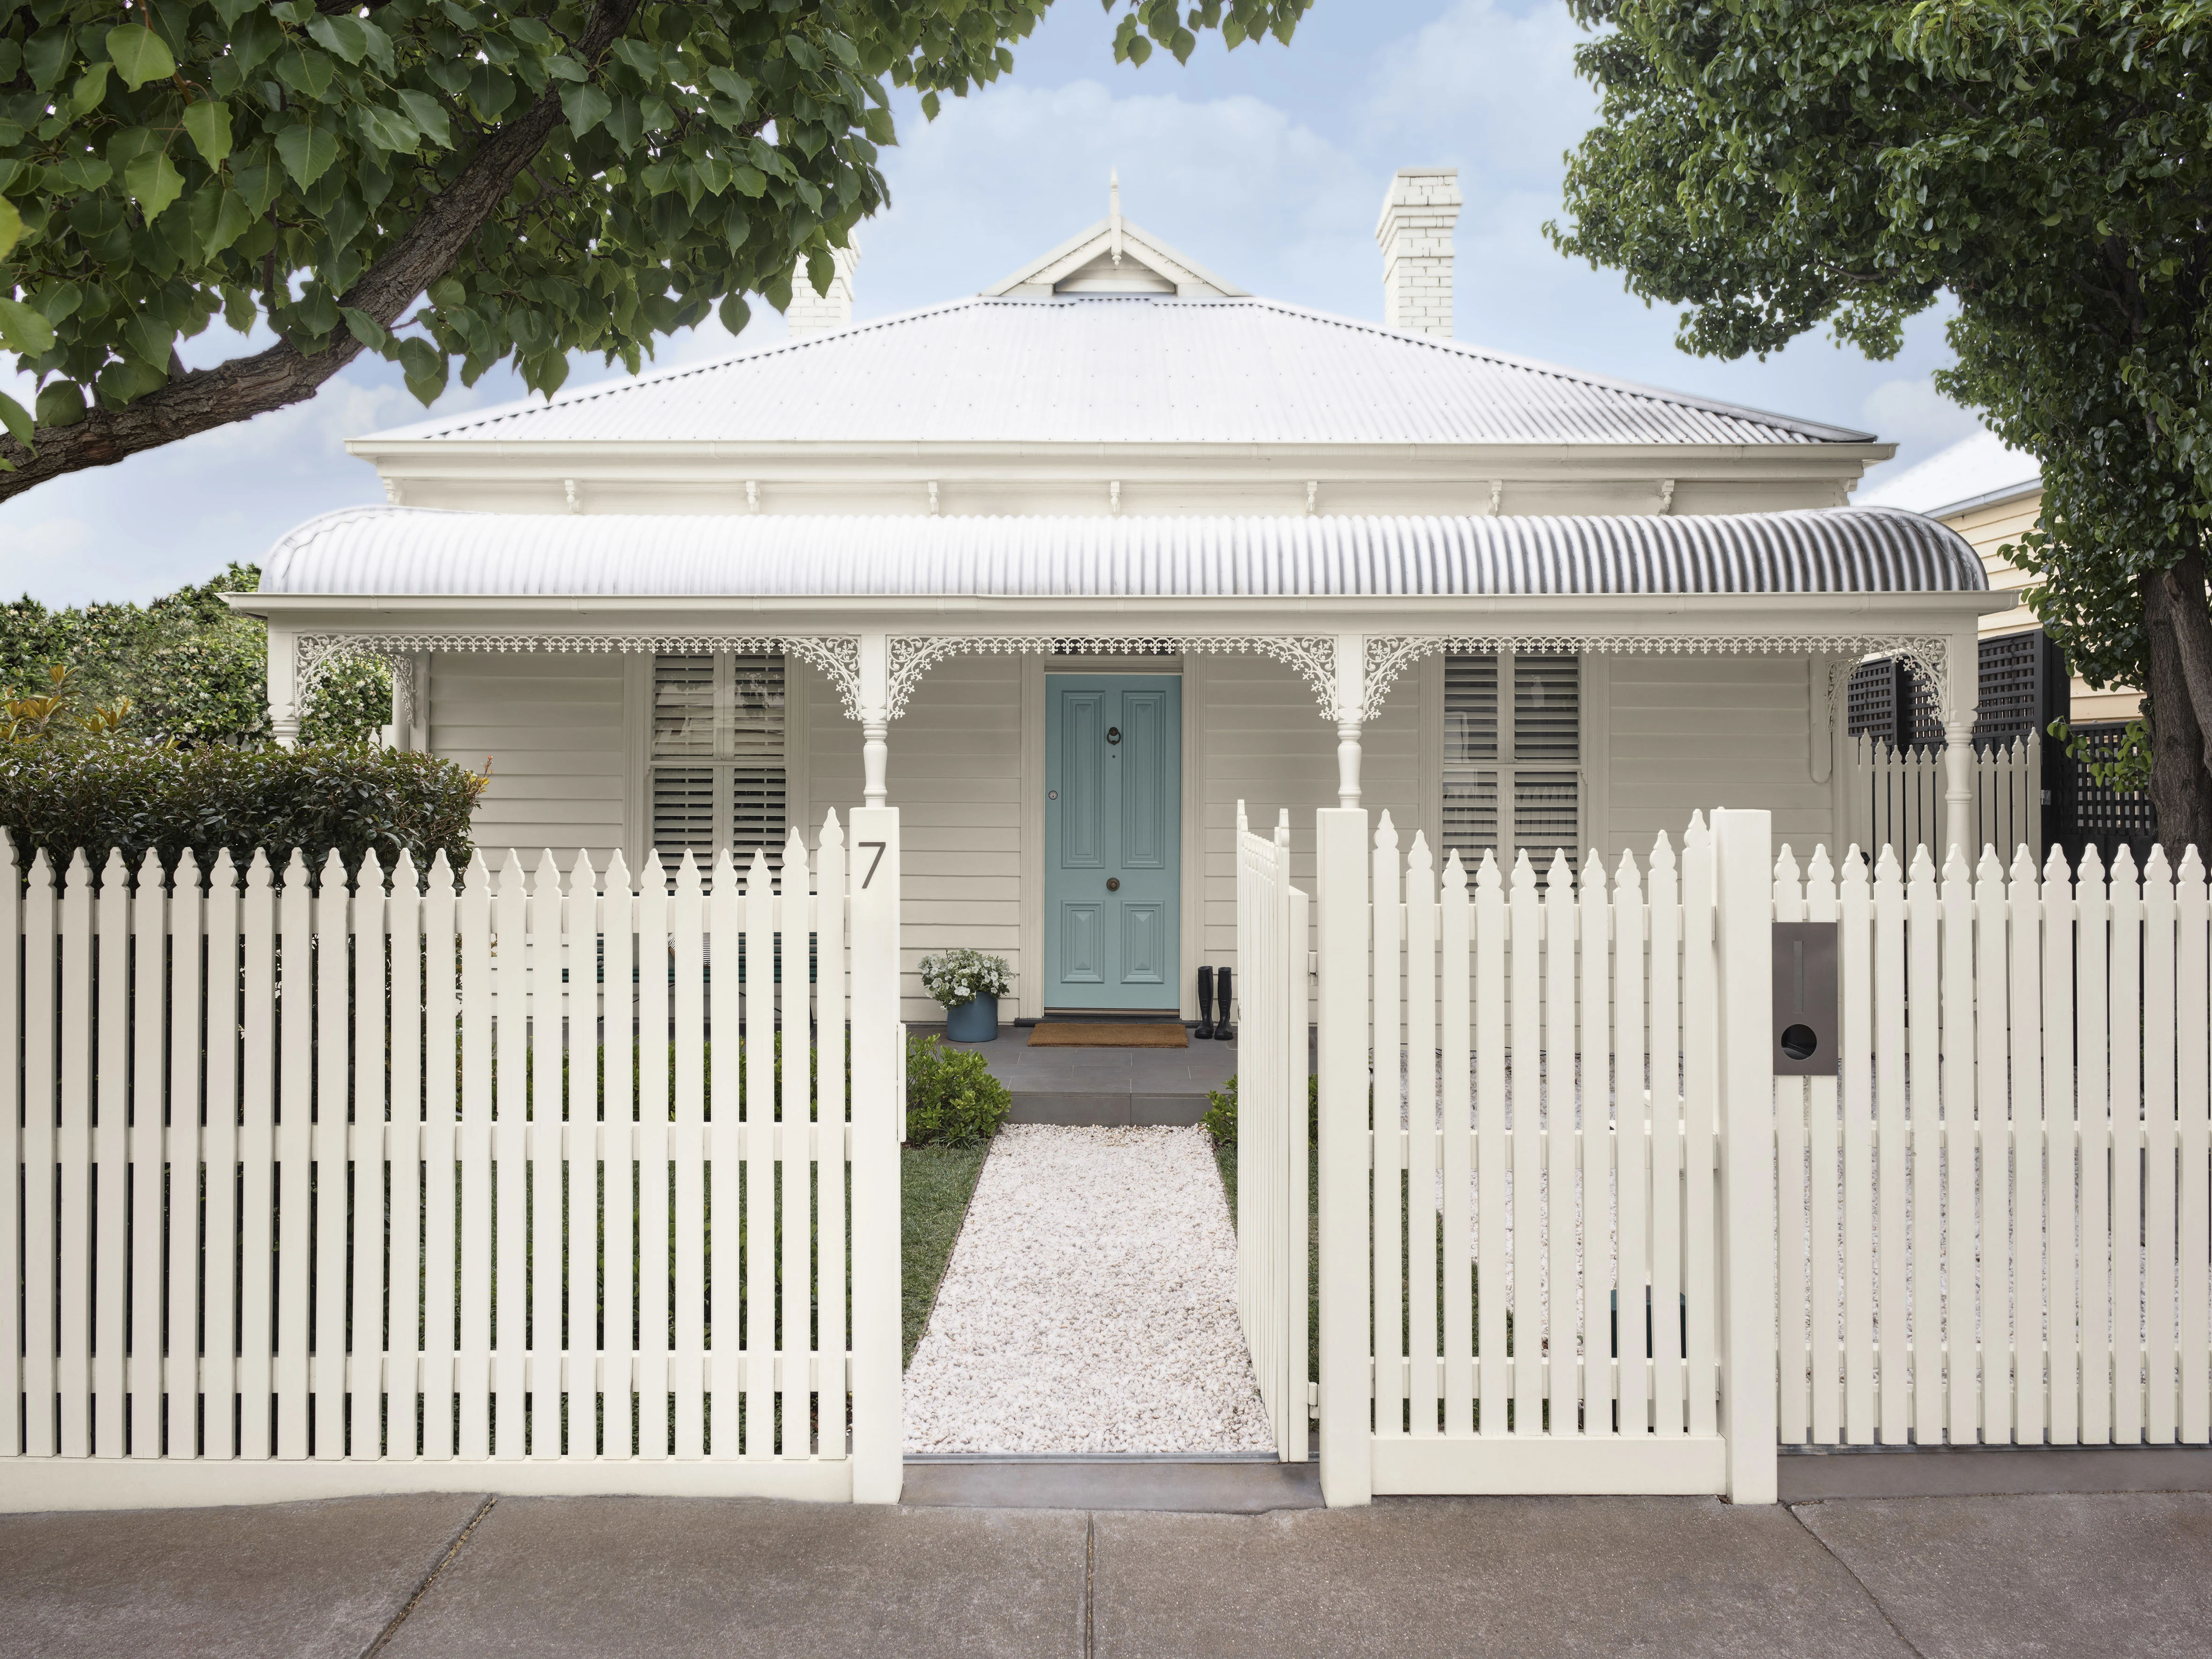 Choosing the perfect fence colour for your home